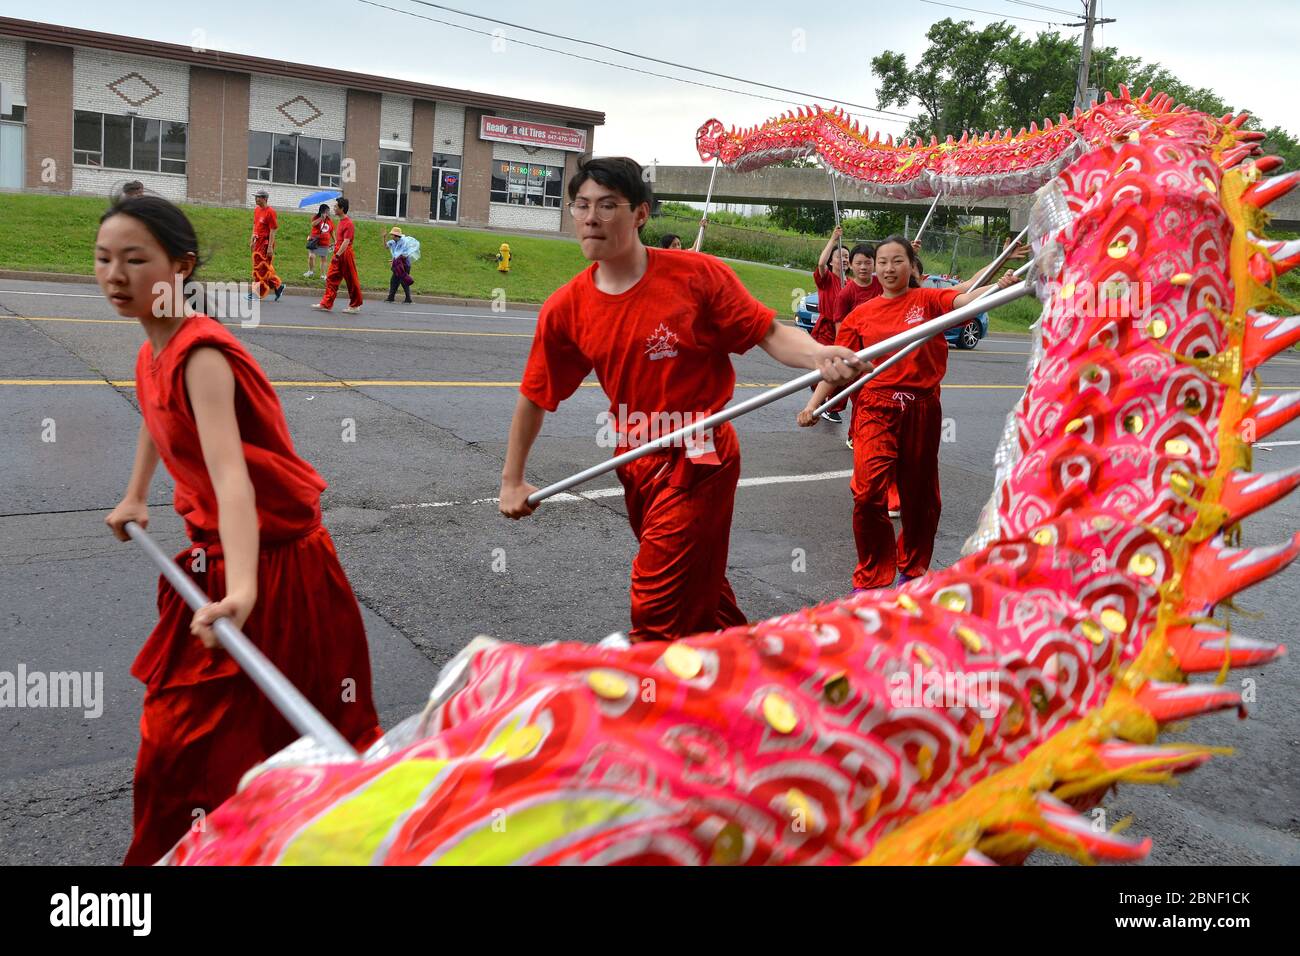 Toronto, Ontario / Canada - July 01, 2017: People performed the traditional Chinese Dragon Dance at the Canada Day parade Stock Photo